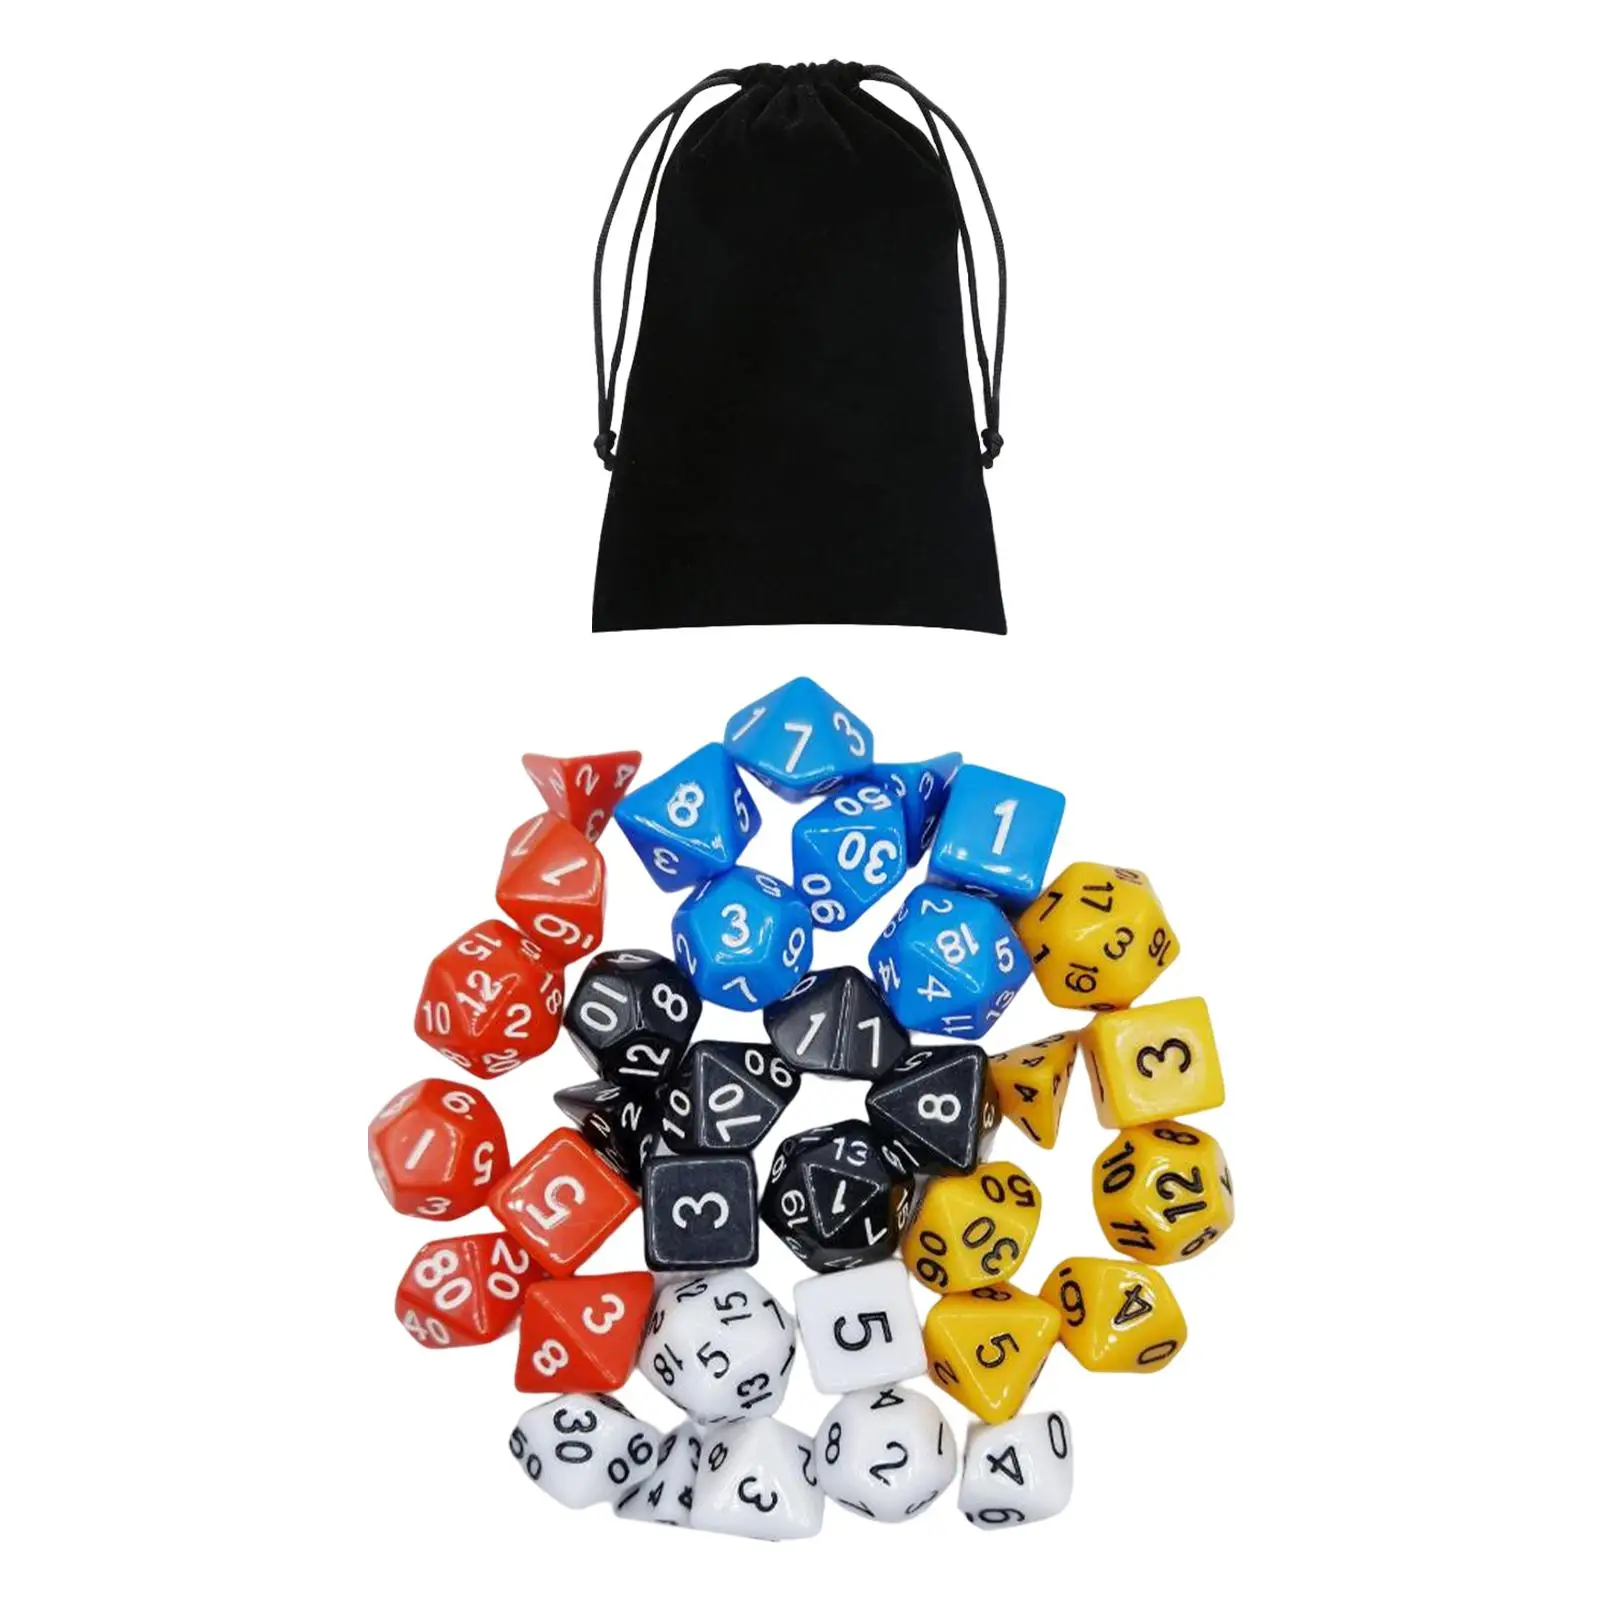 Acrylic Polyhedral Dices Set Toys Favors Engraved Game Dices for Roll Playing Games Board Game Prop Table Games KTV Parties